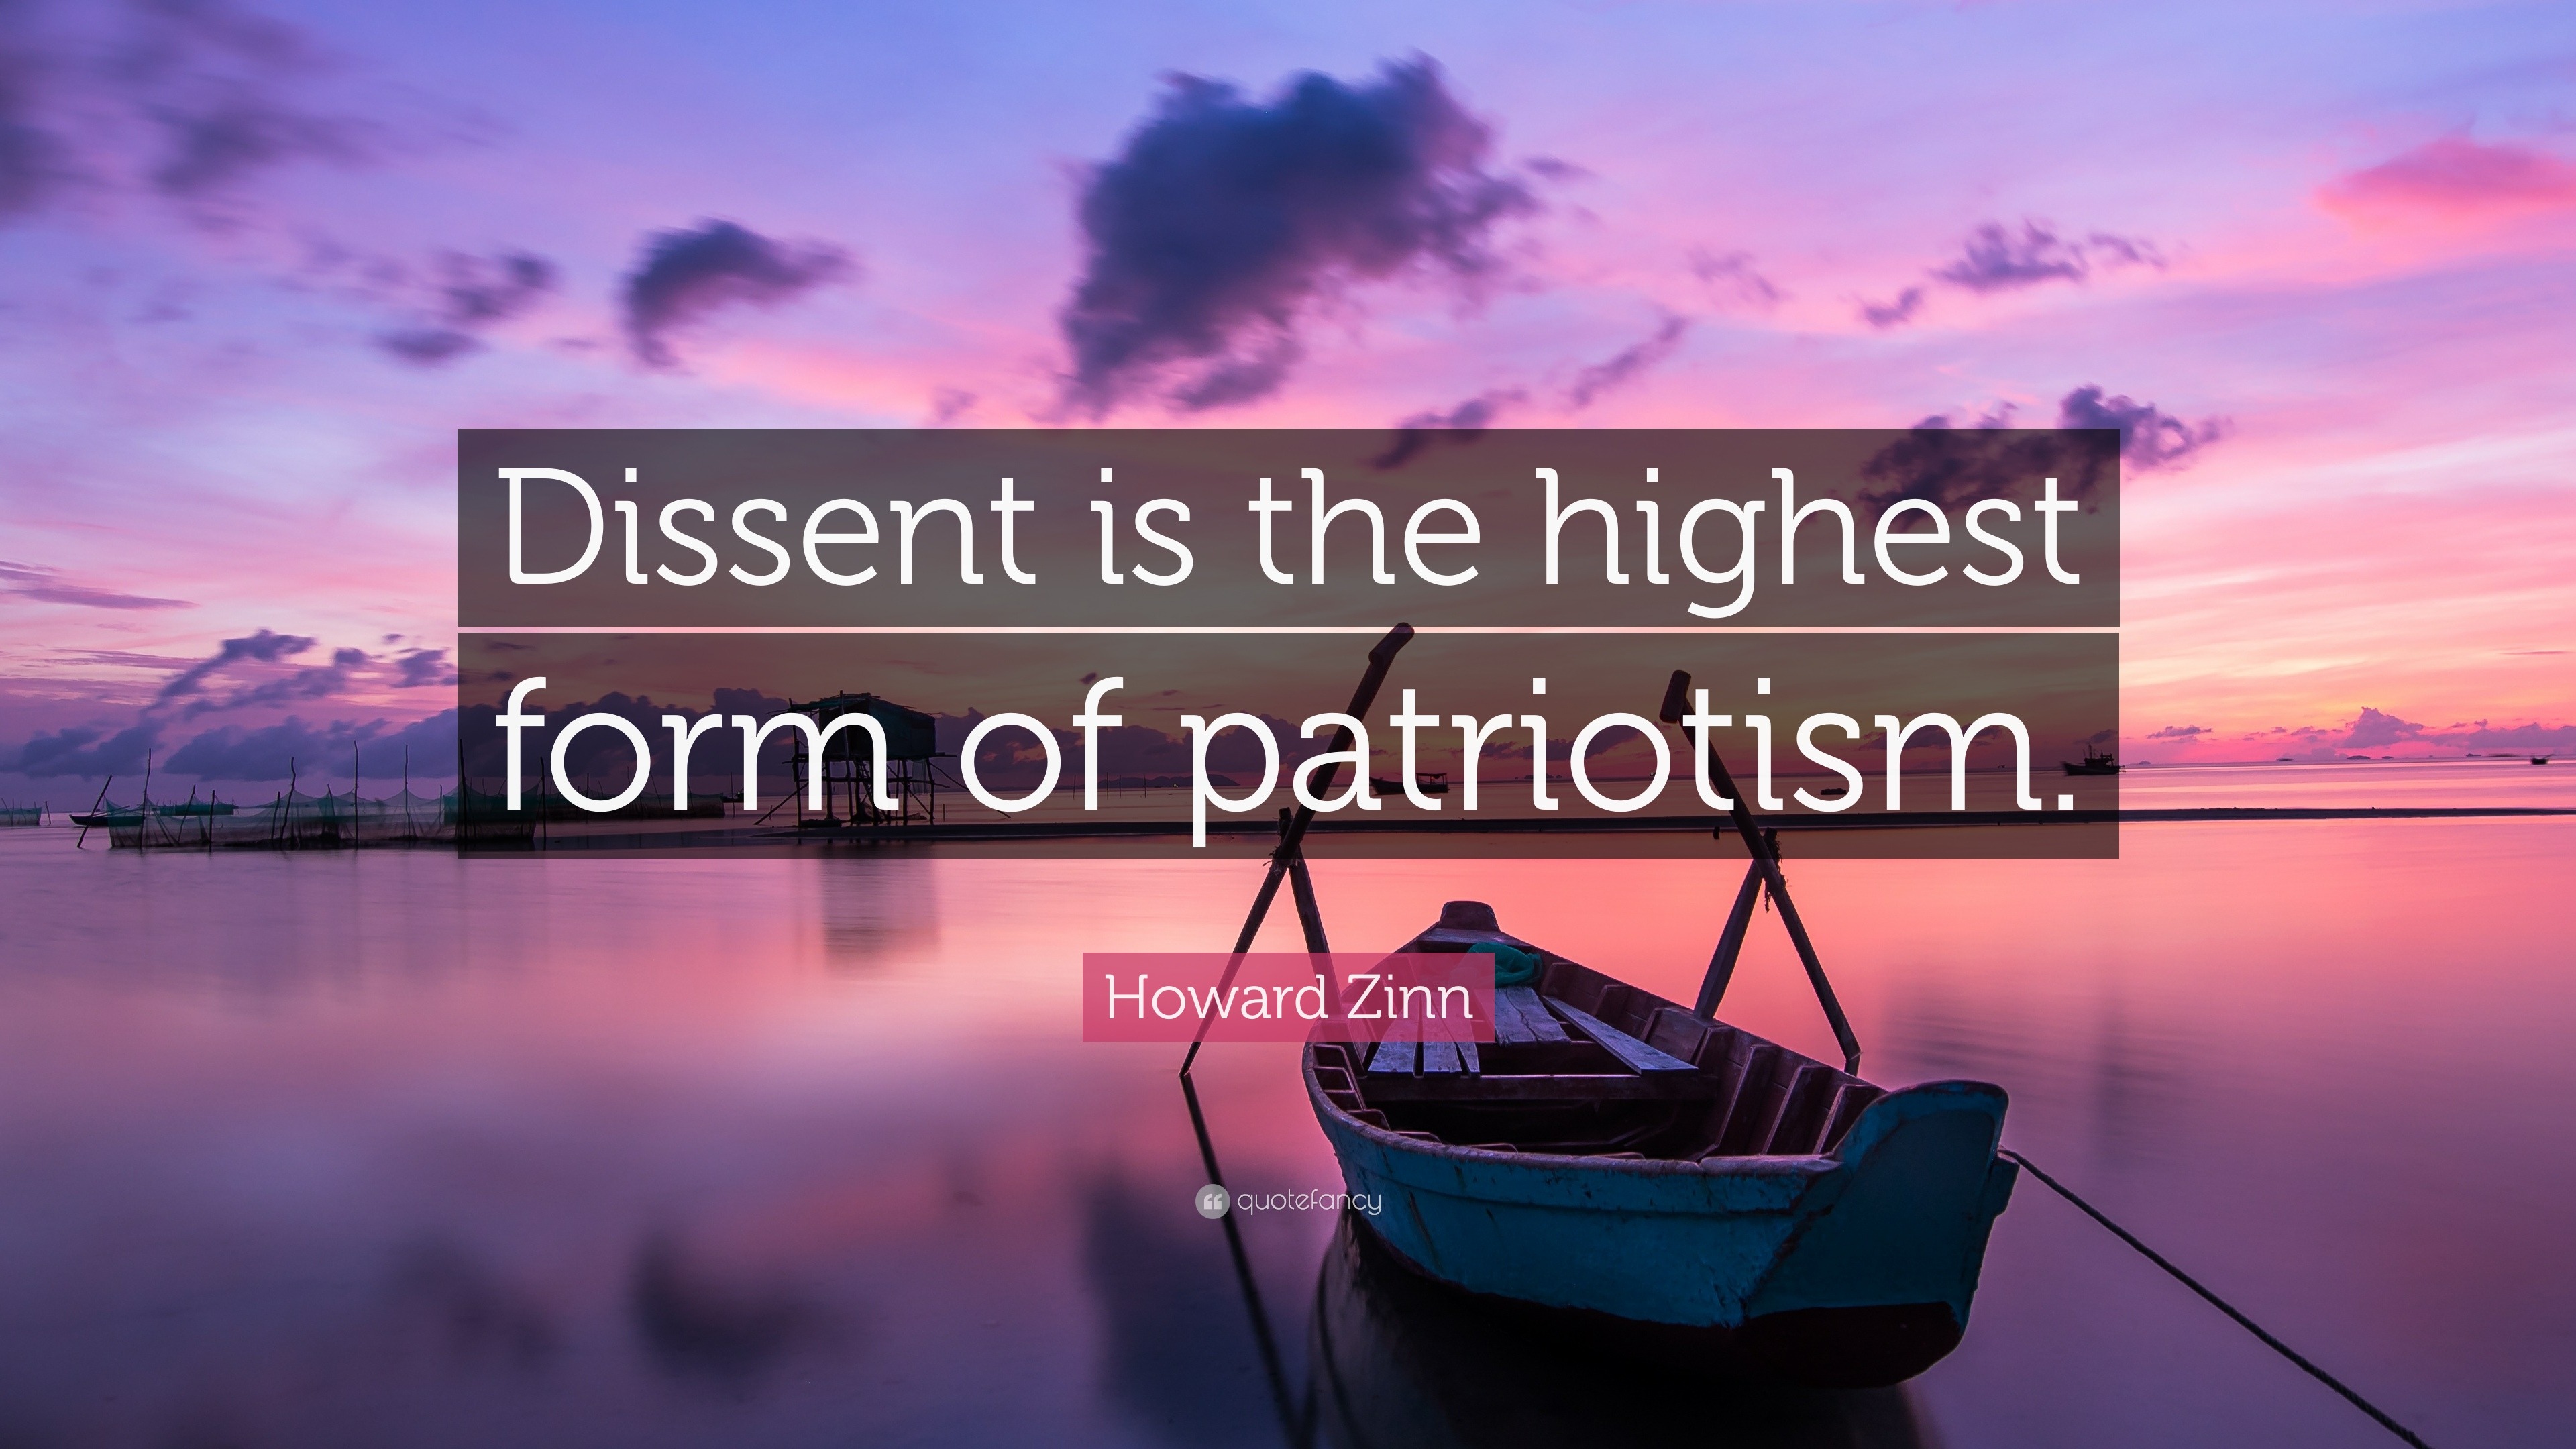 dissent-is-the-highest-form-of-patriotism-thomas-jefferson-small